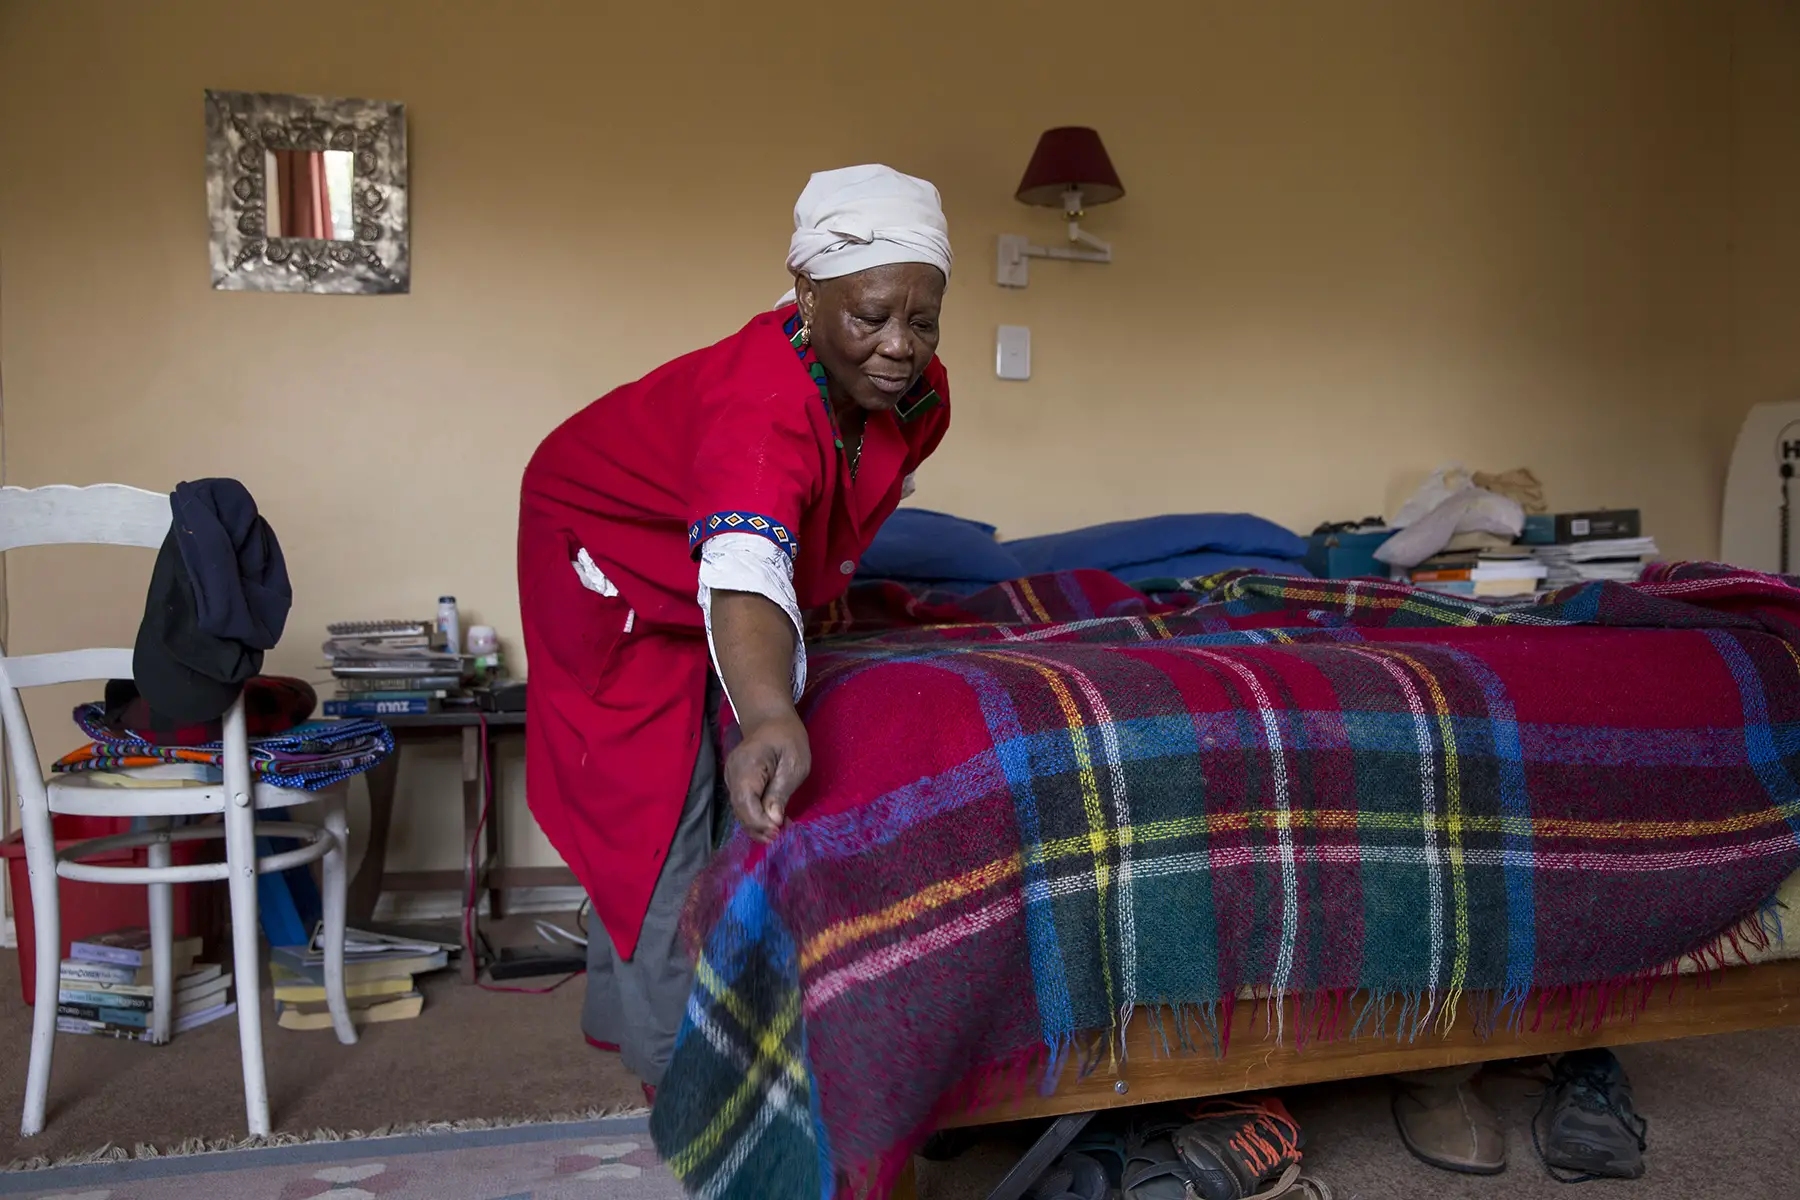 A domestic worker in Johannesburg, South Africa